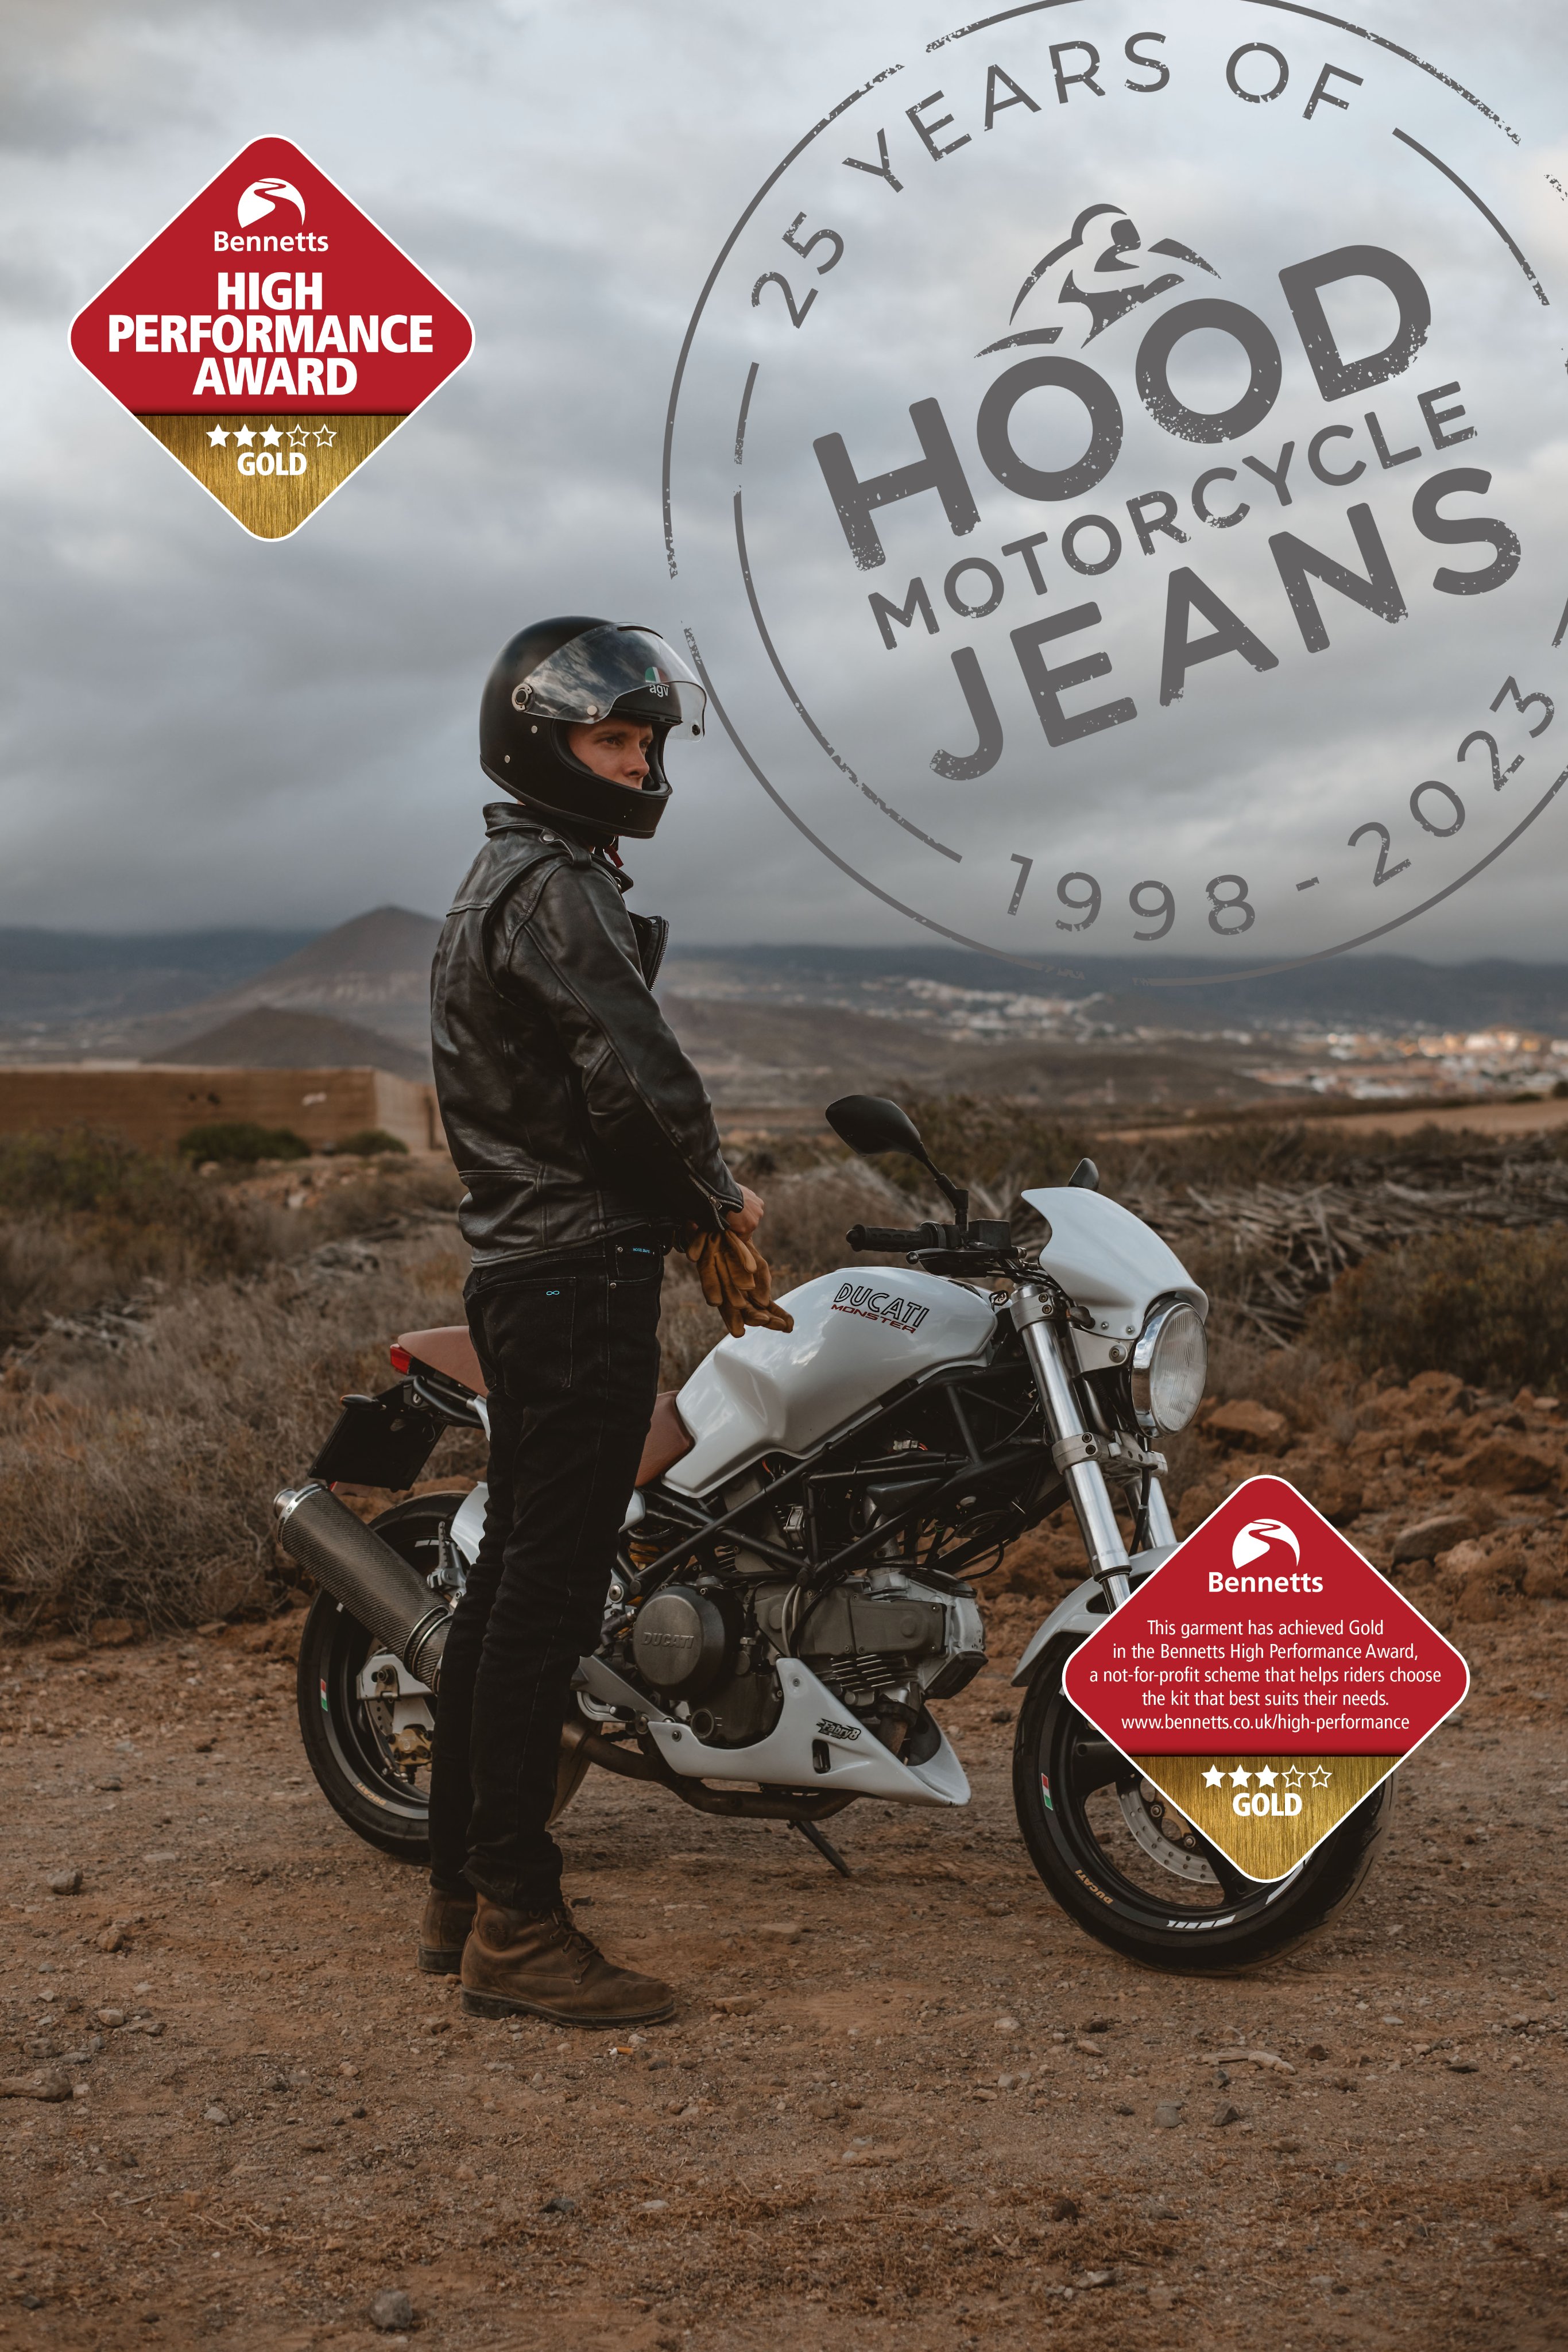 Jean Archives - Hood Motorcycle Jeans